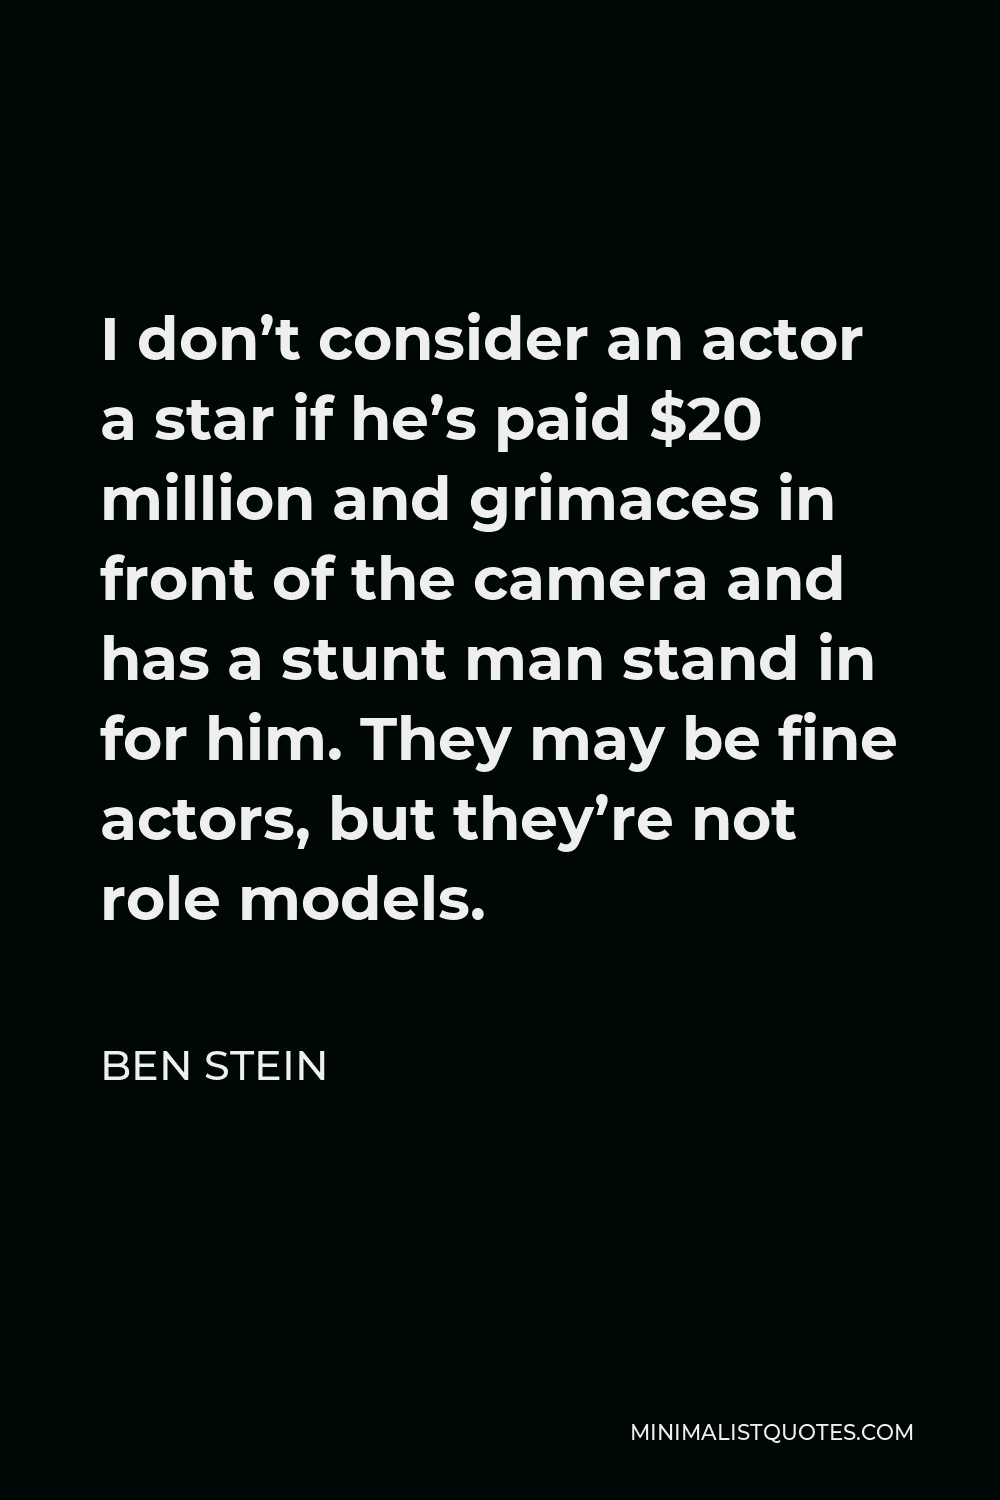 Ben Stein Quote - I don’t consider an actor a star if he’s paid $20 million and grimaces in front of the camera and has a stunt man stand in for him. They may be fine actors, but they’re not role models.